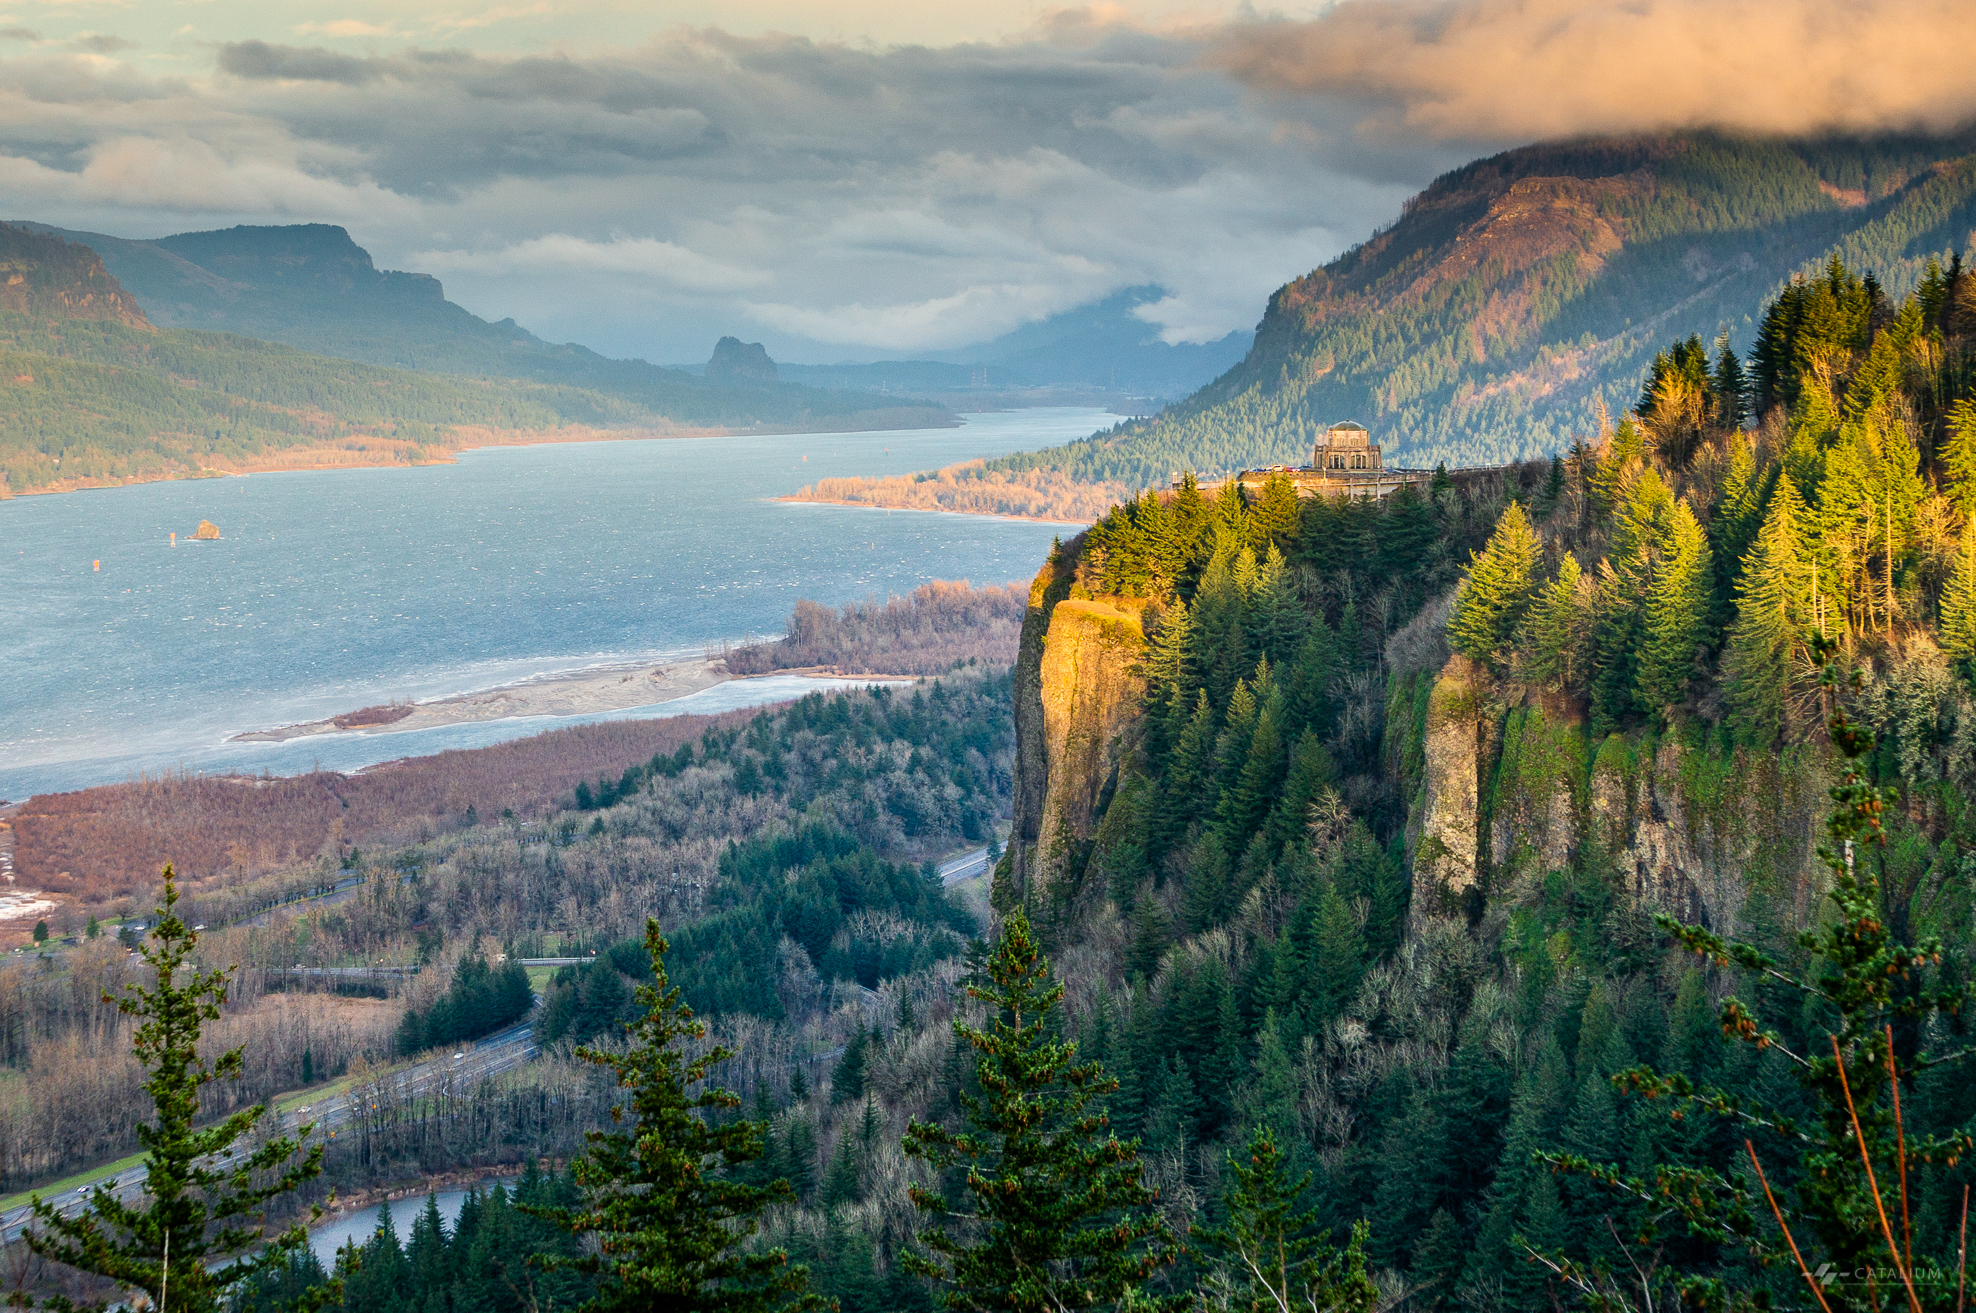 View of the Columbia River Gorge with the Vista House in sight